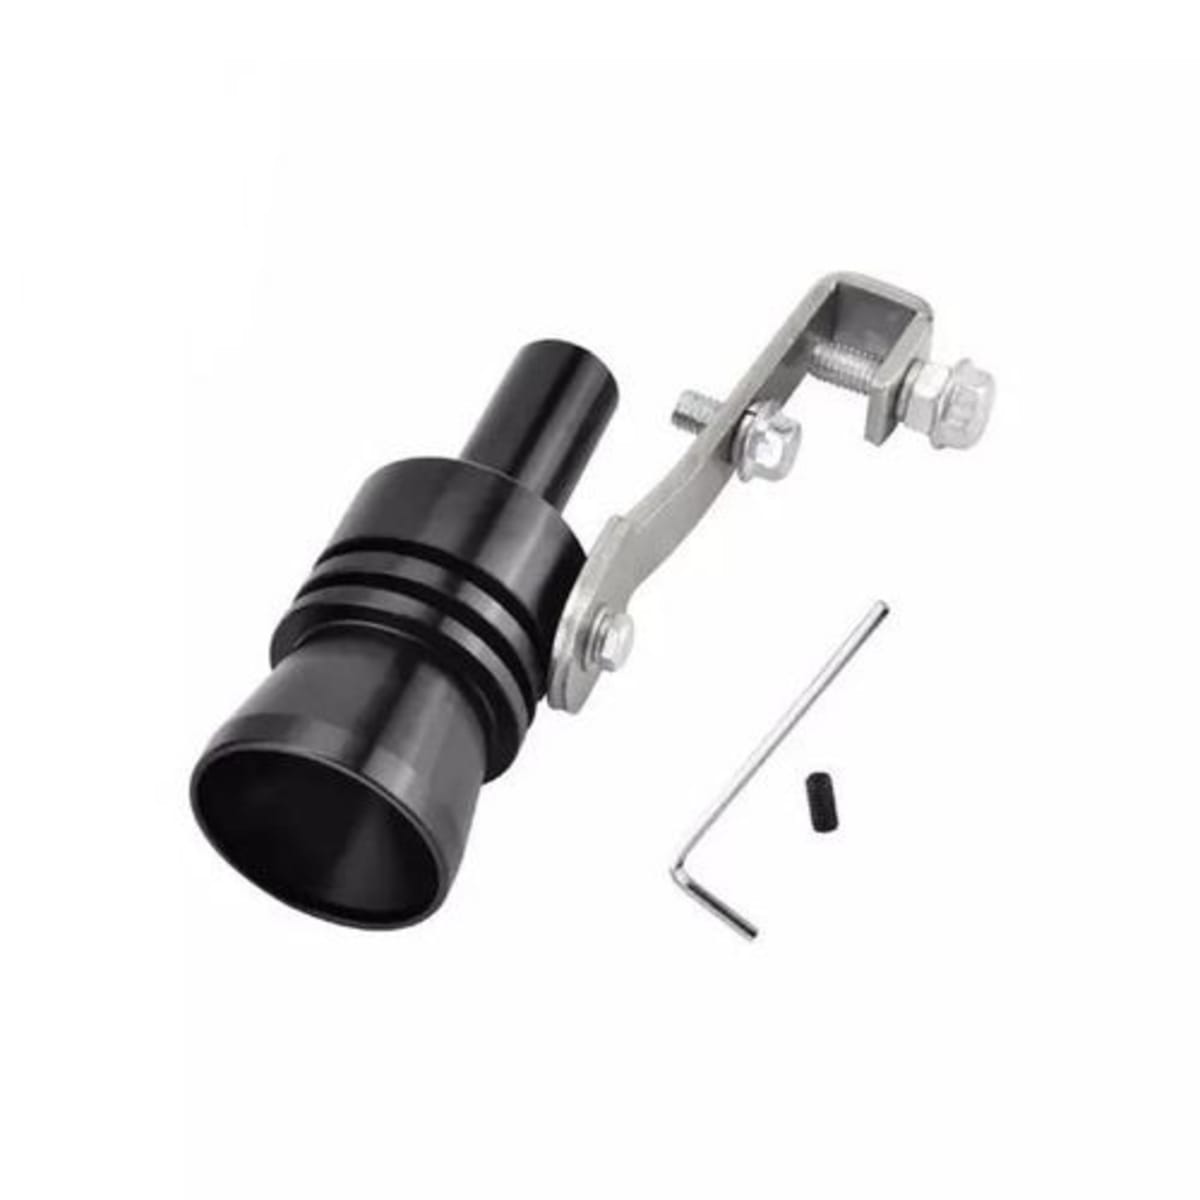 Car Turbo Whistle Muffler Exhaust Sound Booster